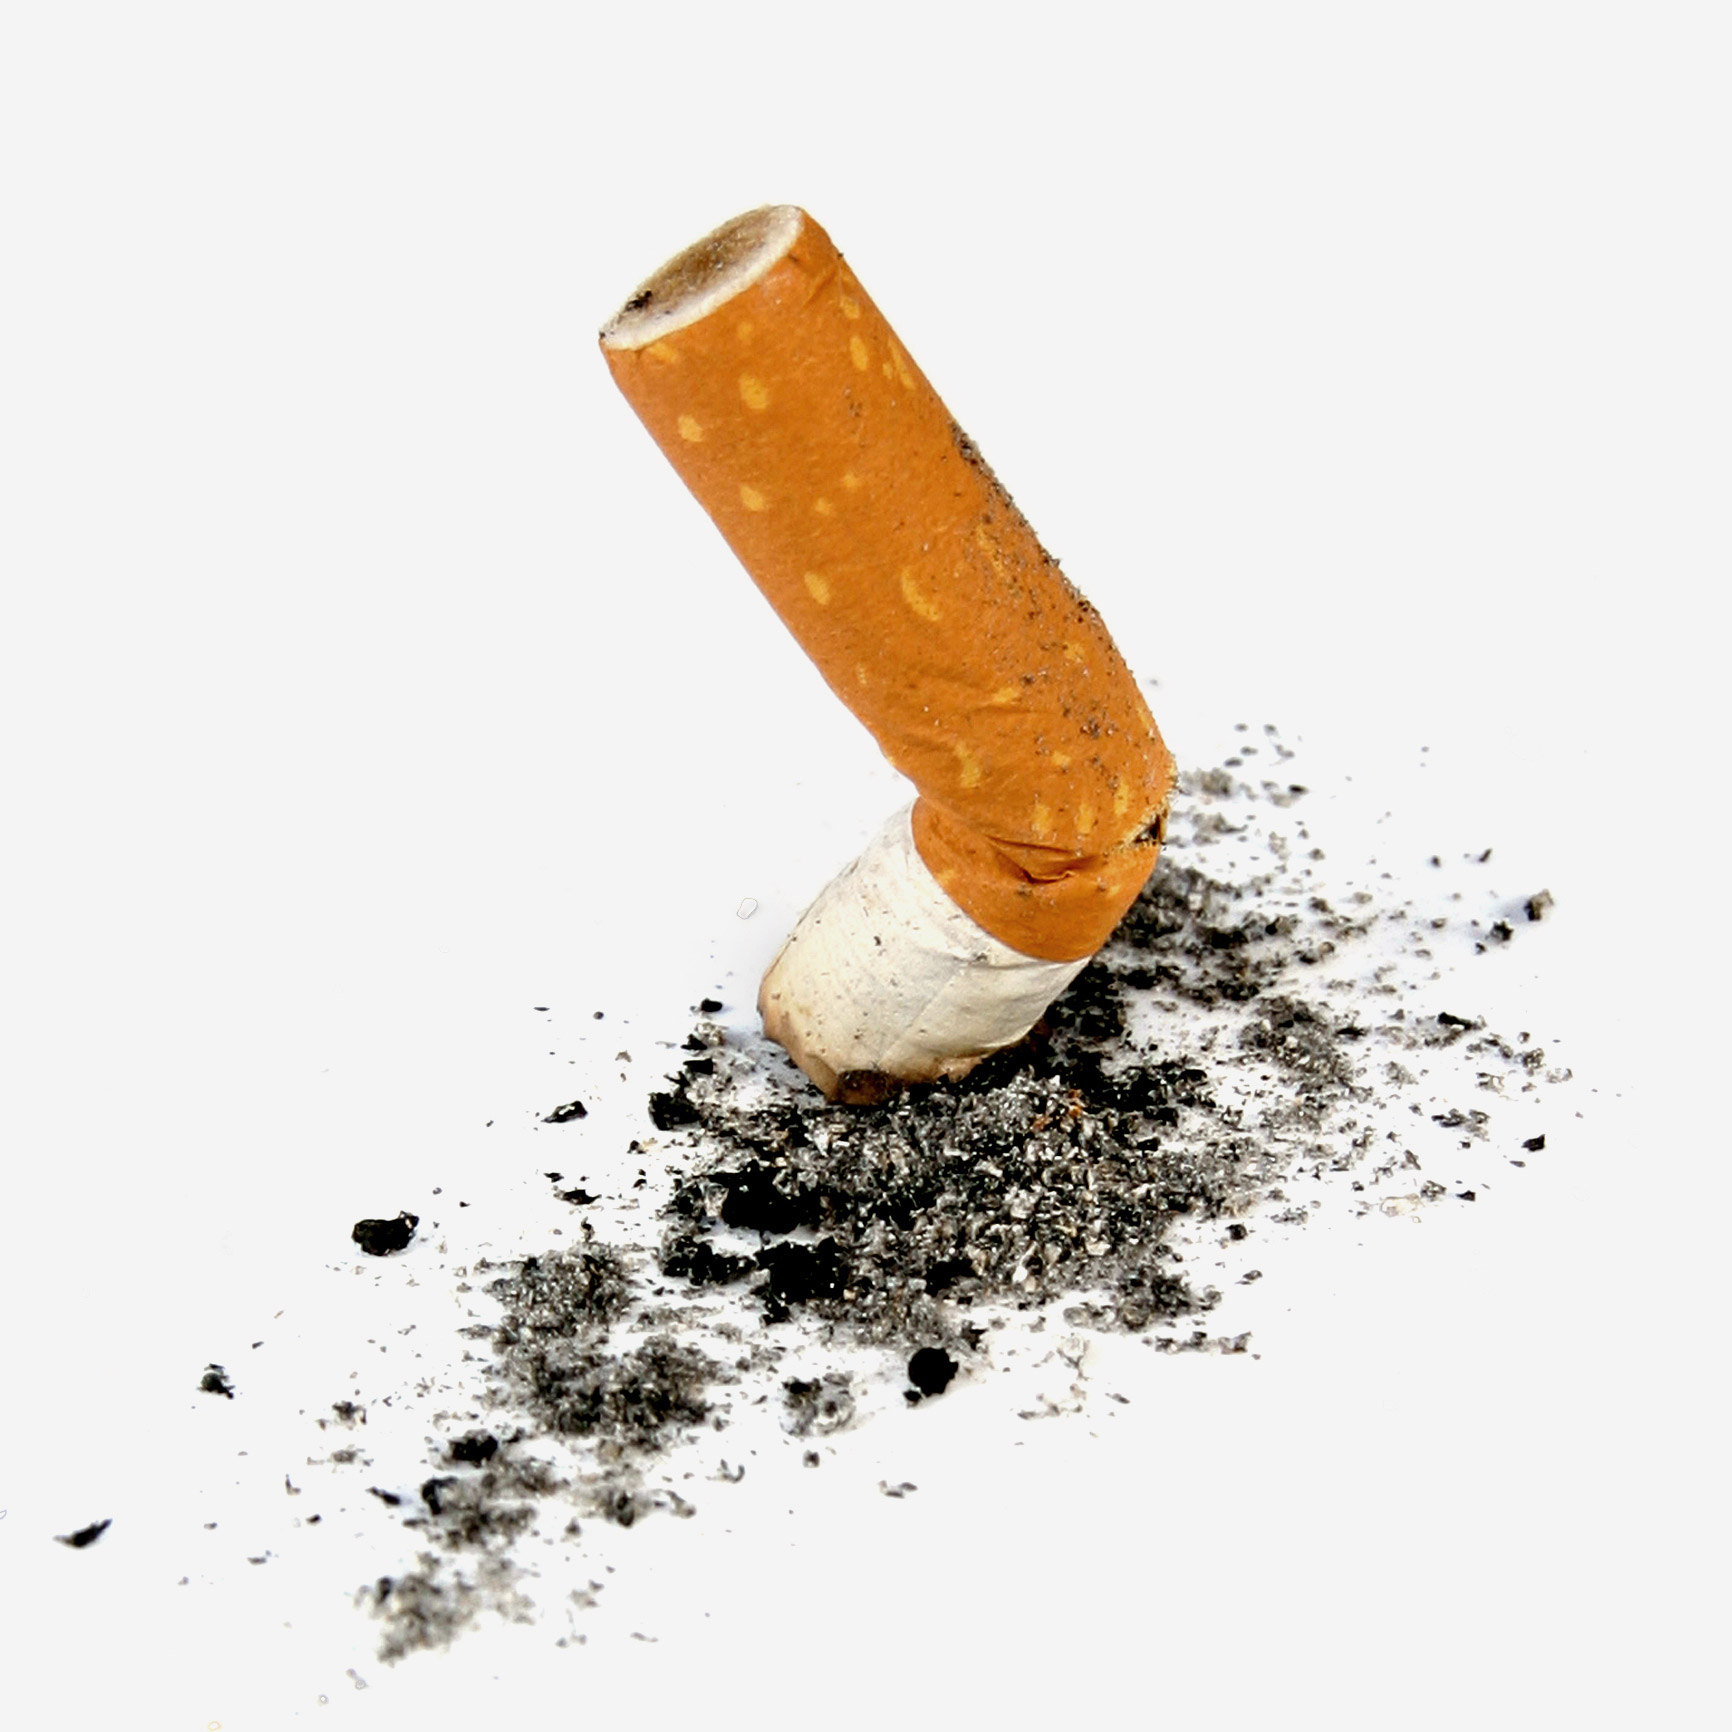 Phot of a crushed cigarette